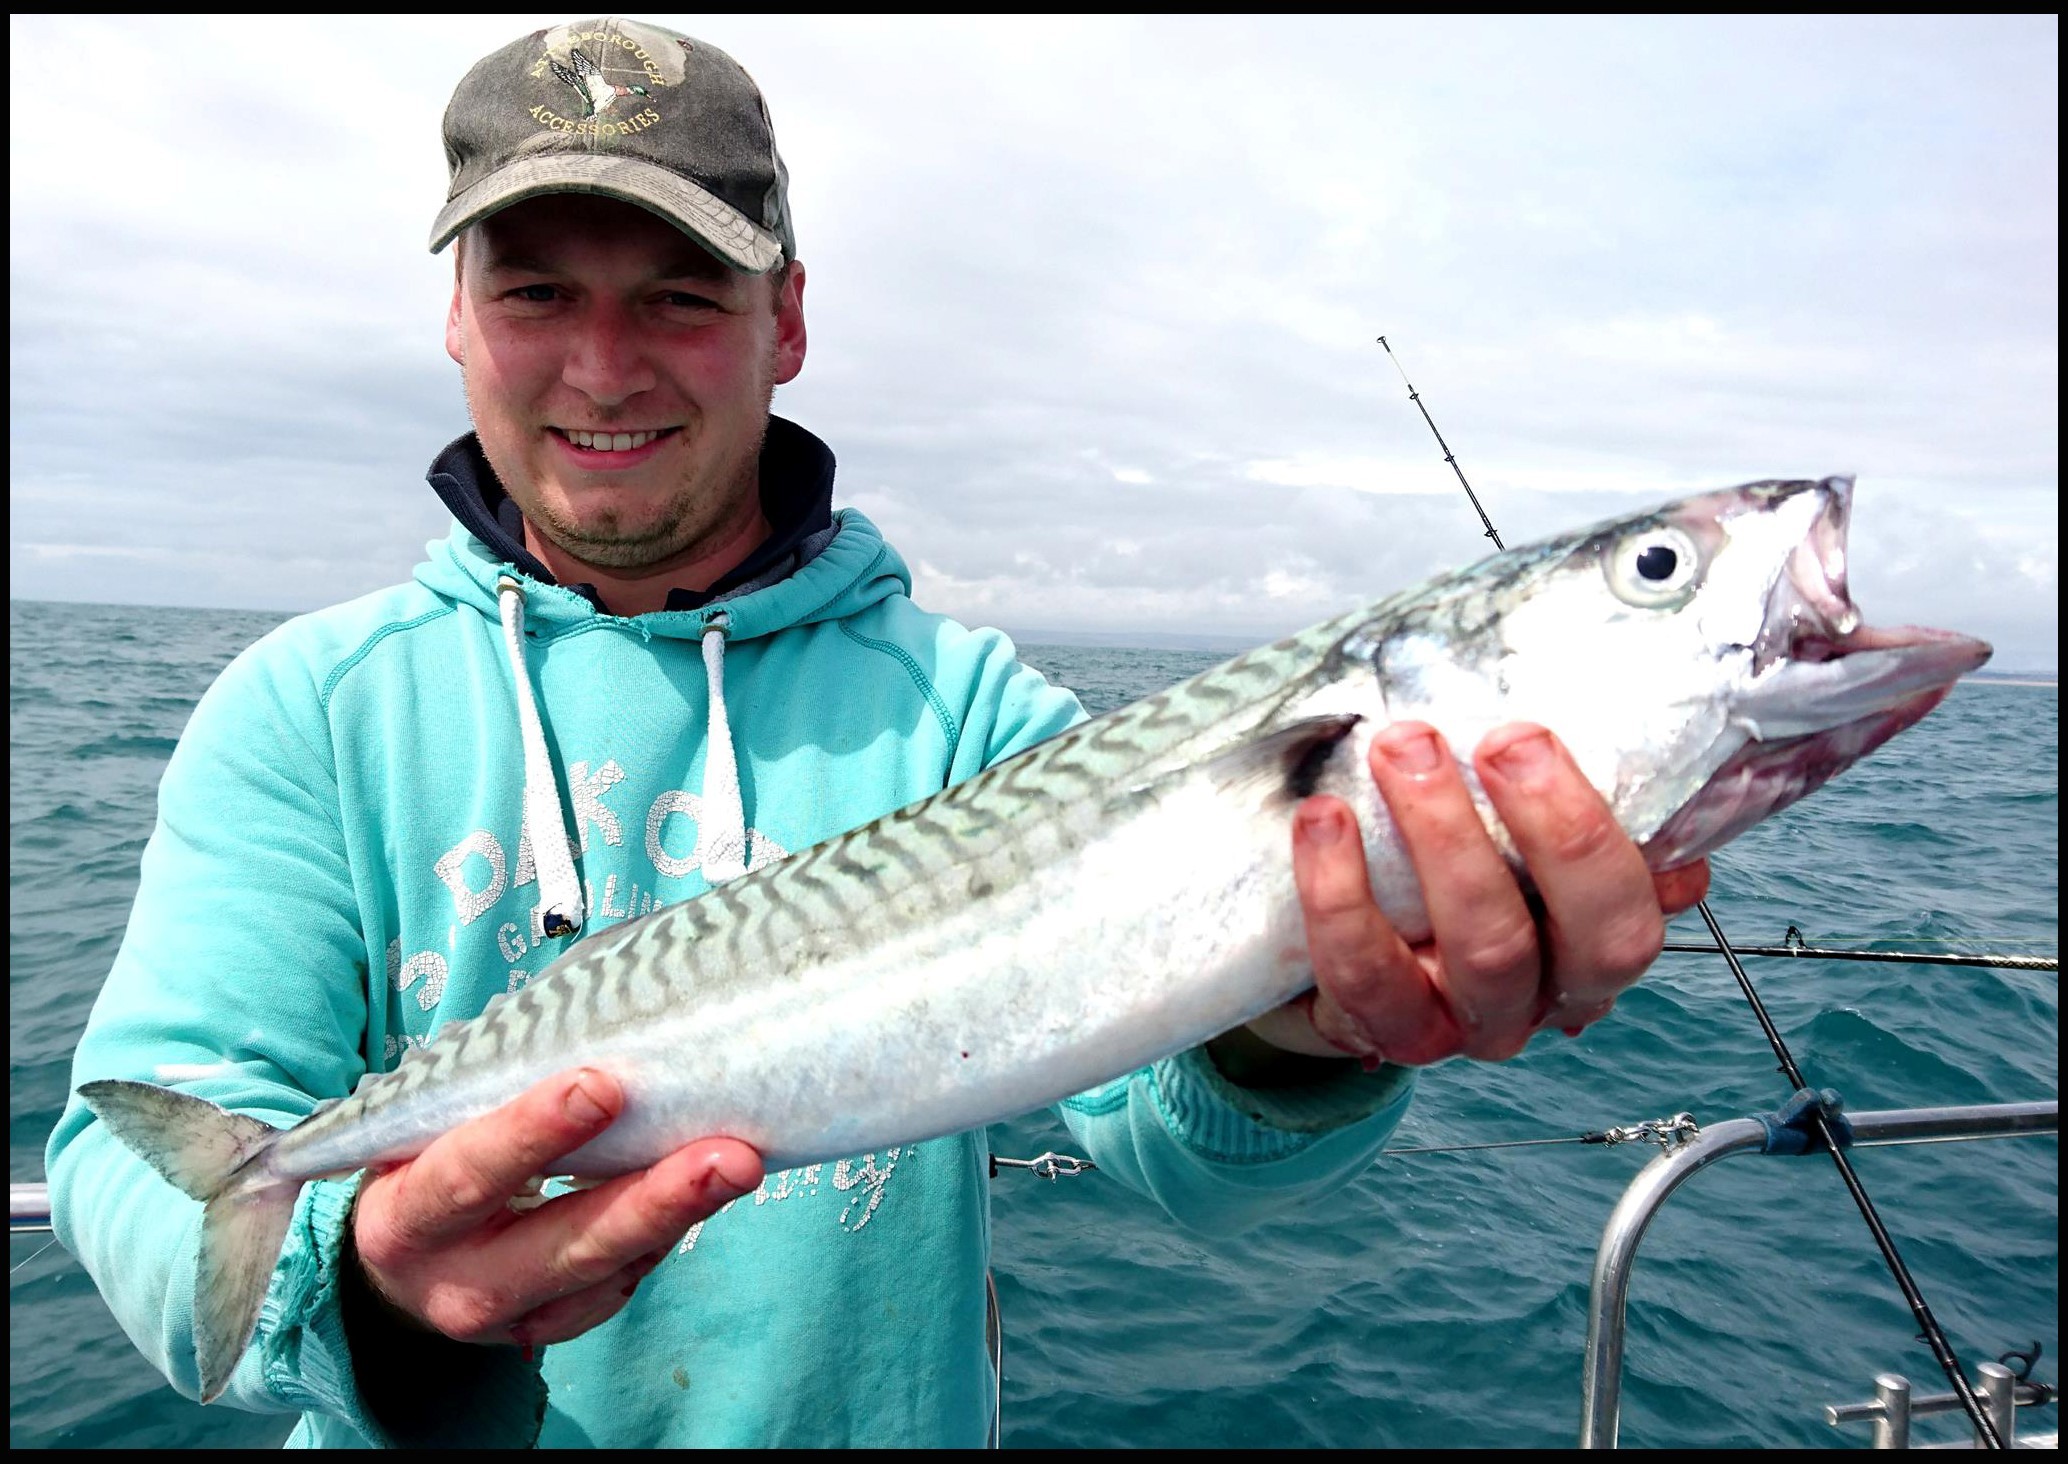 Angler snares the biggest mackerel caught in 30 years in British waters